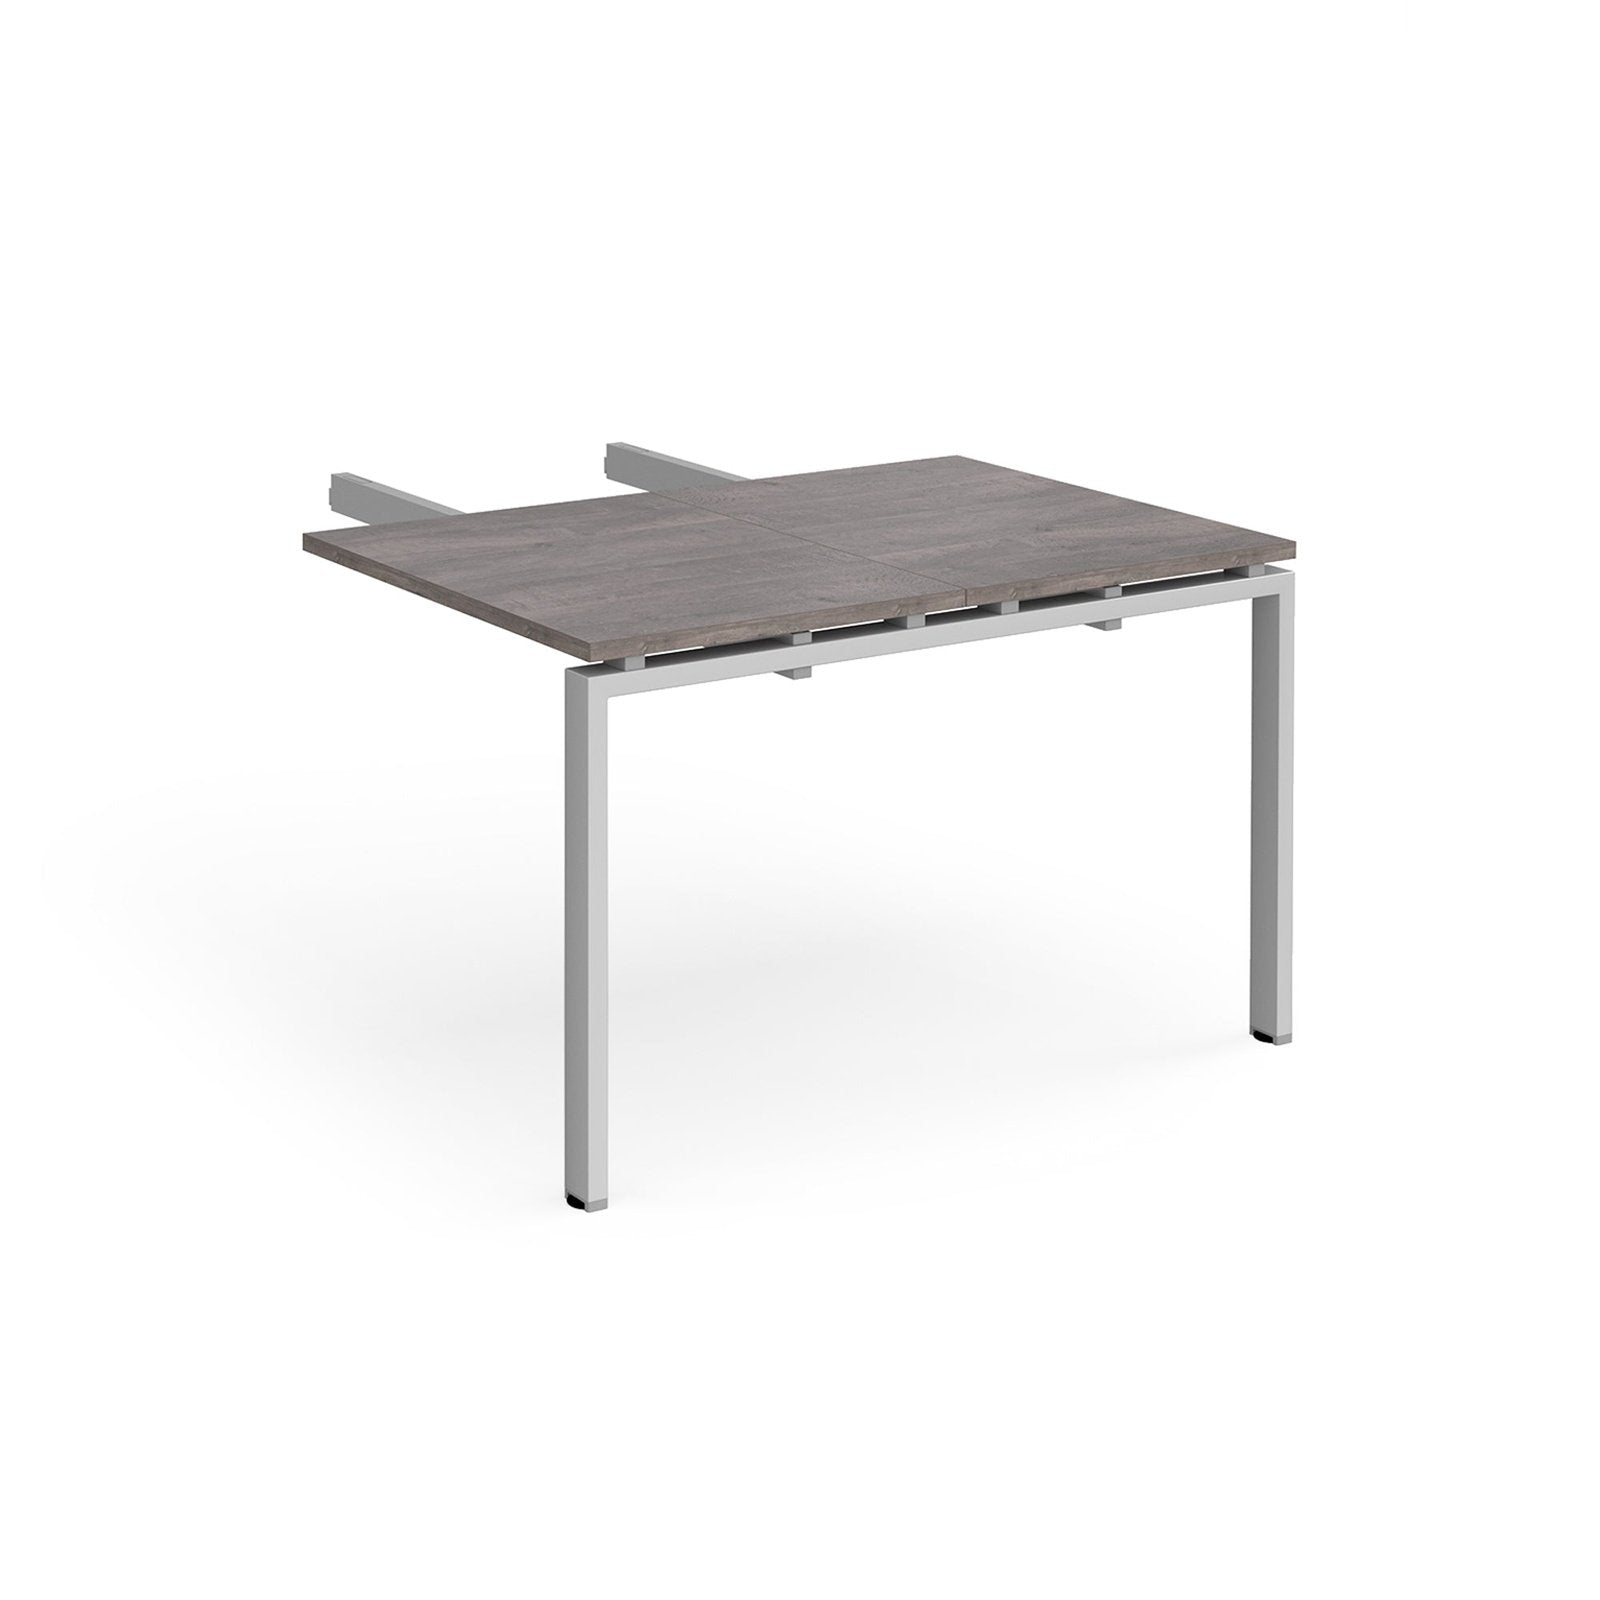 Adapt add on unit double return desk 800mm x 1200mm - Office Products Online